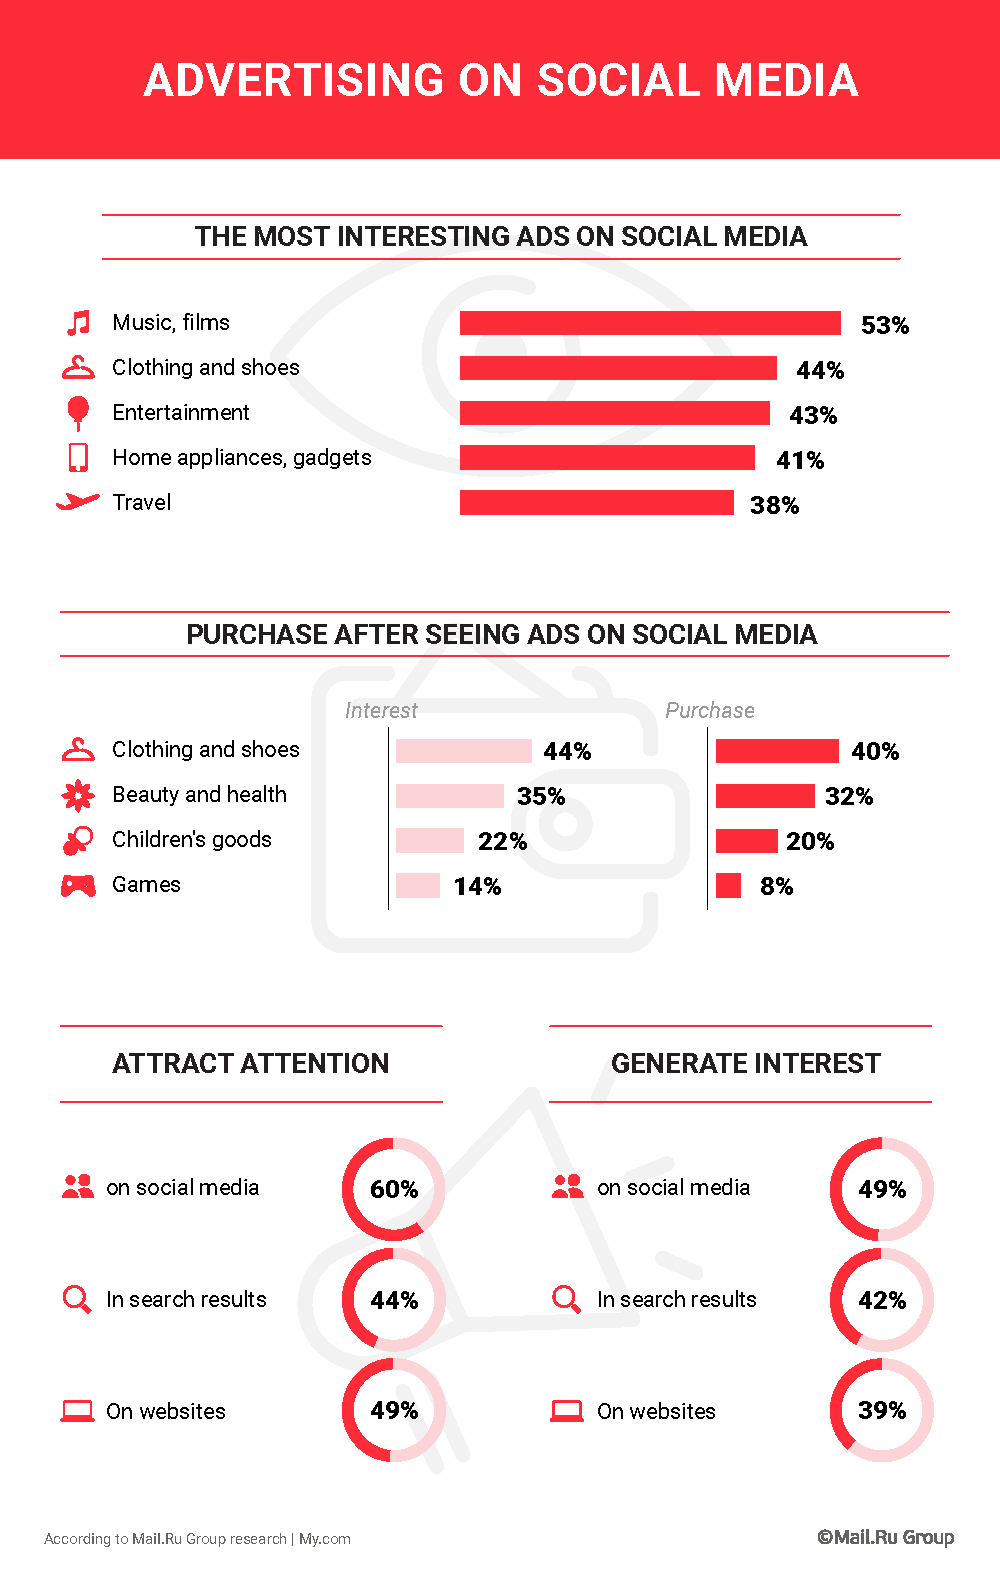 Mail.Ru Group Survey on Social Media Advertising: Two ...